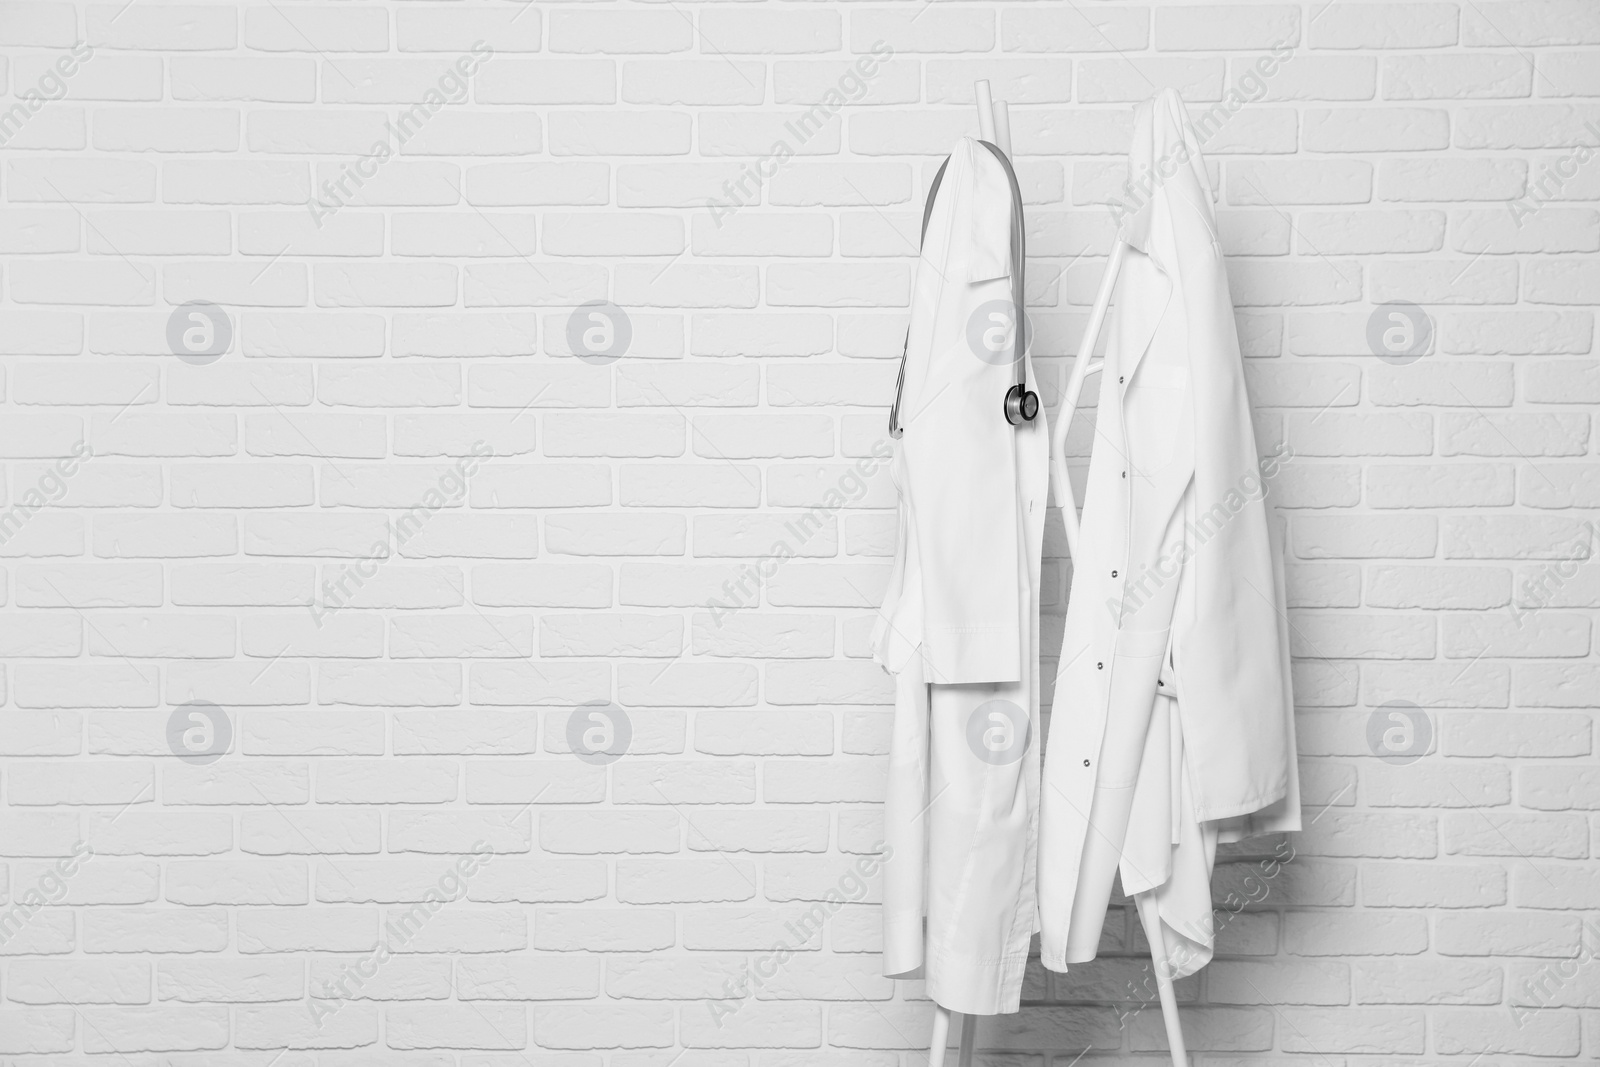 Photo of Medical uniforms and stethoscope hanging on rack near white brick wall. Space for text